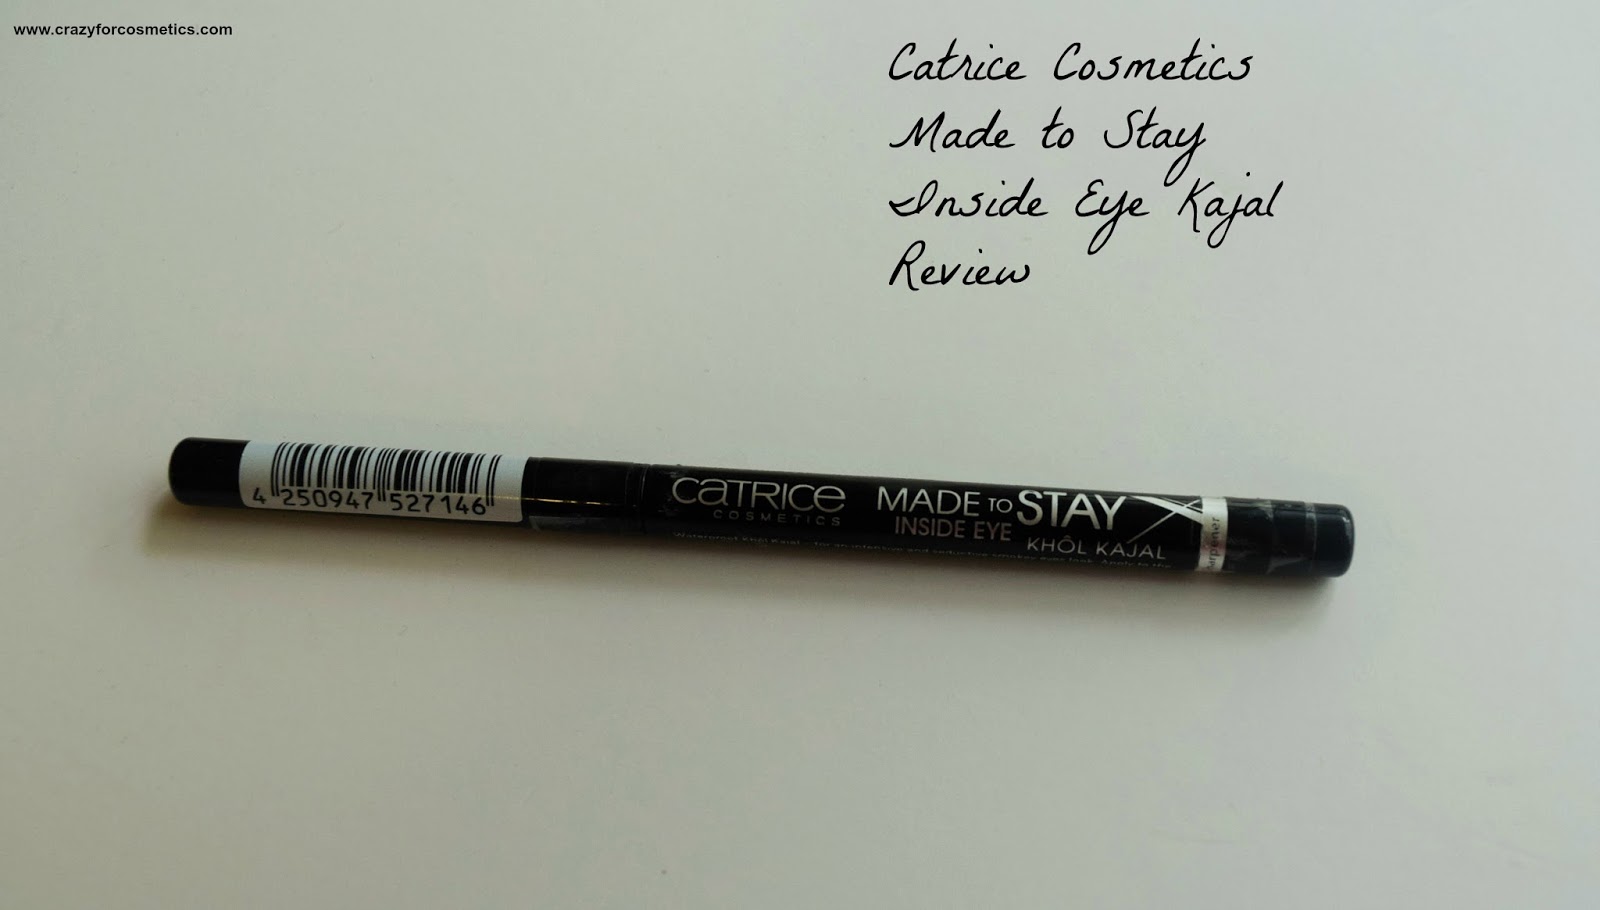 Lifestyle Come to 010 Cosmetics- Shopping: the based Makeup,Lifestyle for Made Eye Black in Stay and and A Crazy Beauty/ Singapore Khol about blog Kajal Stay Catrice Cosmetics Inside shade